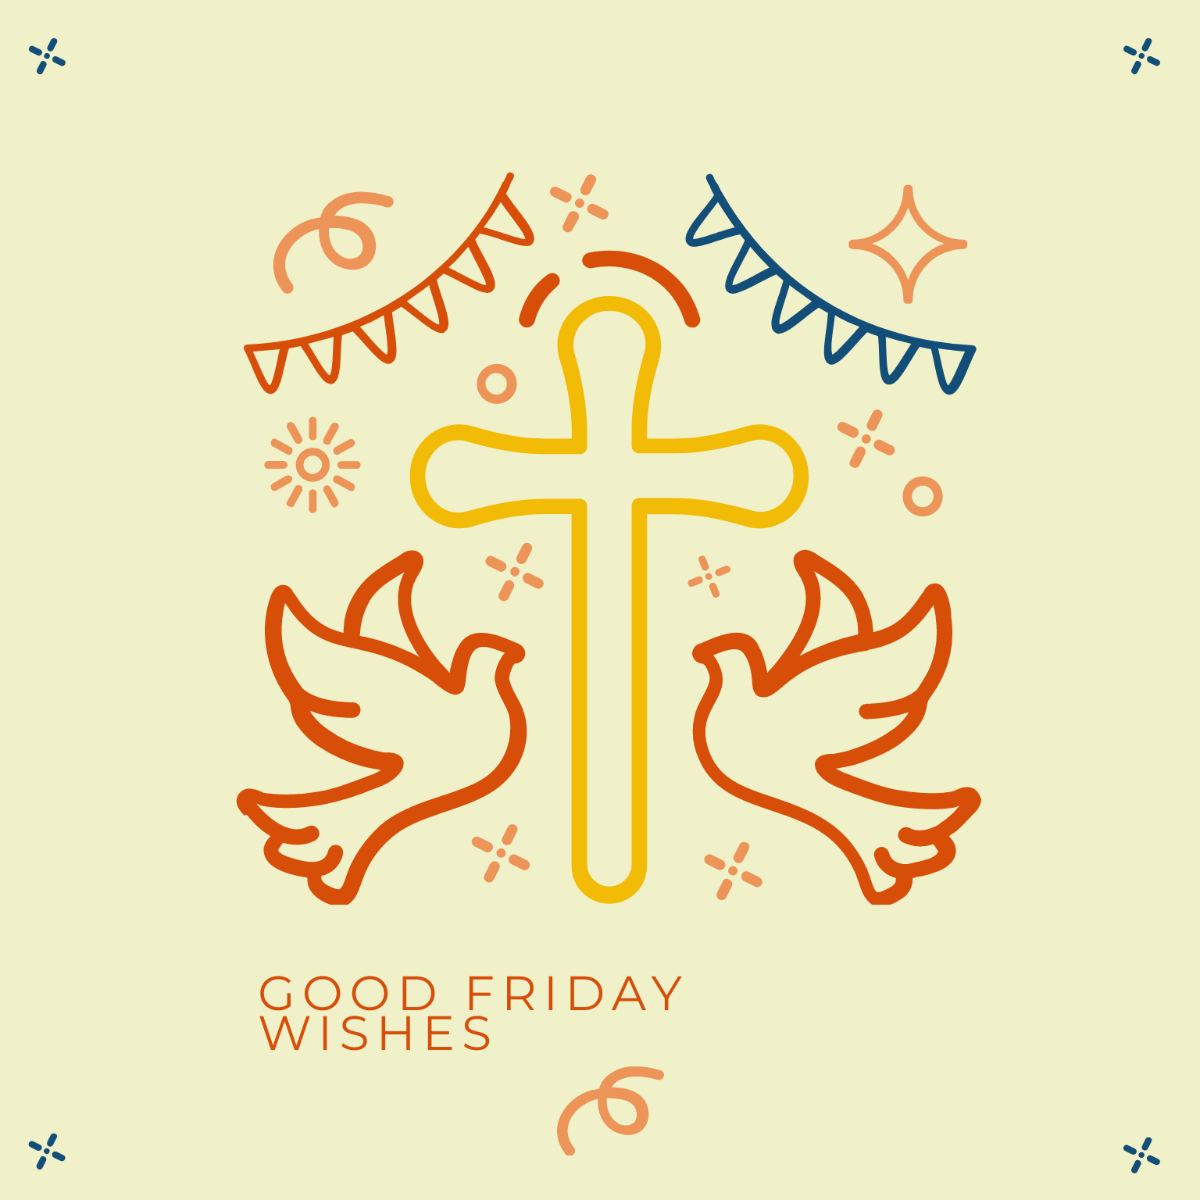 Good Friday Wishes Vector Template